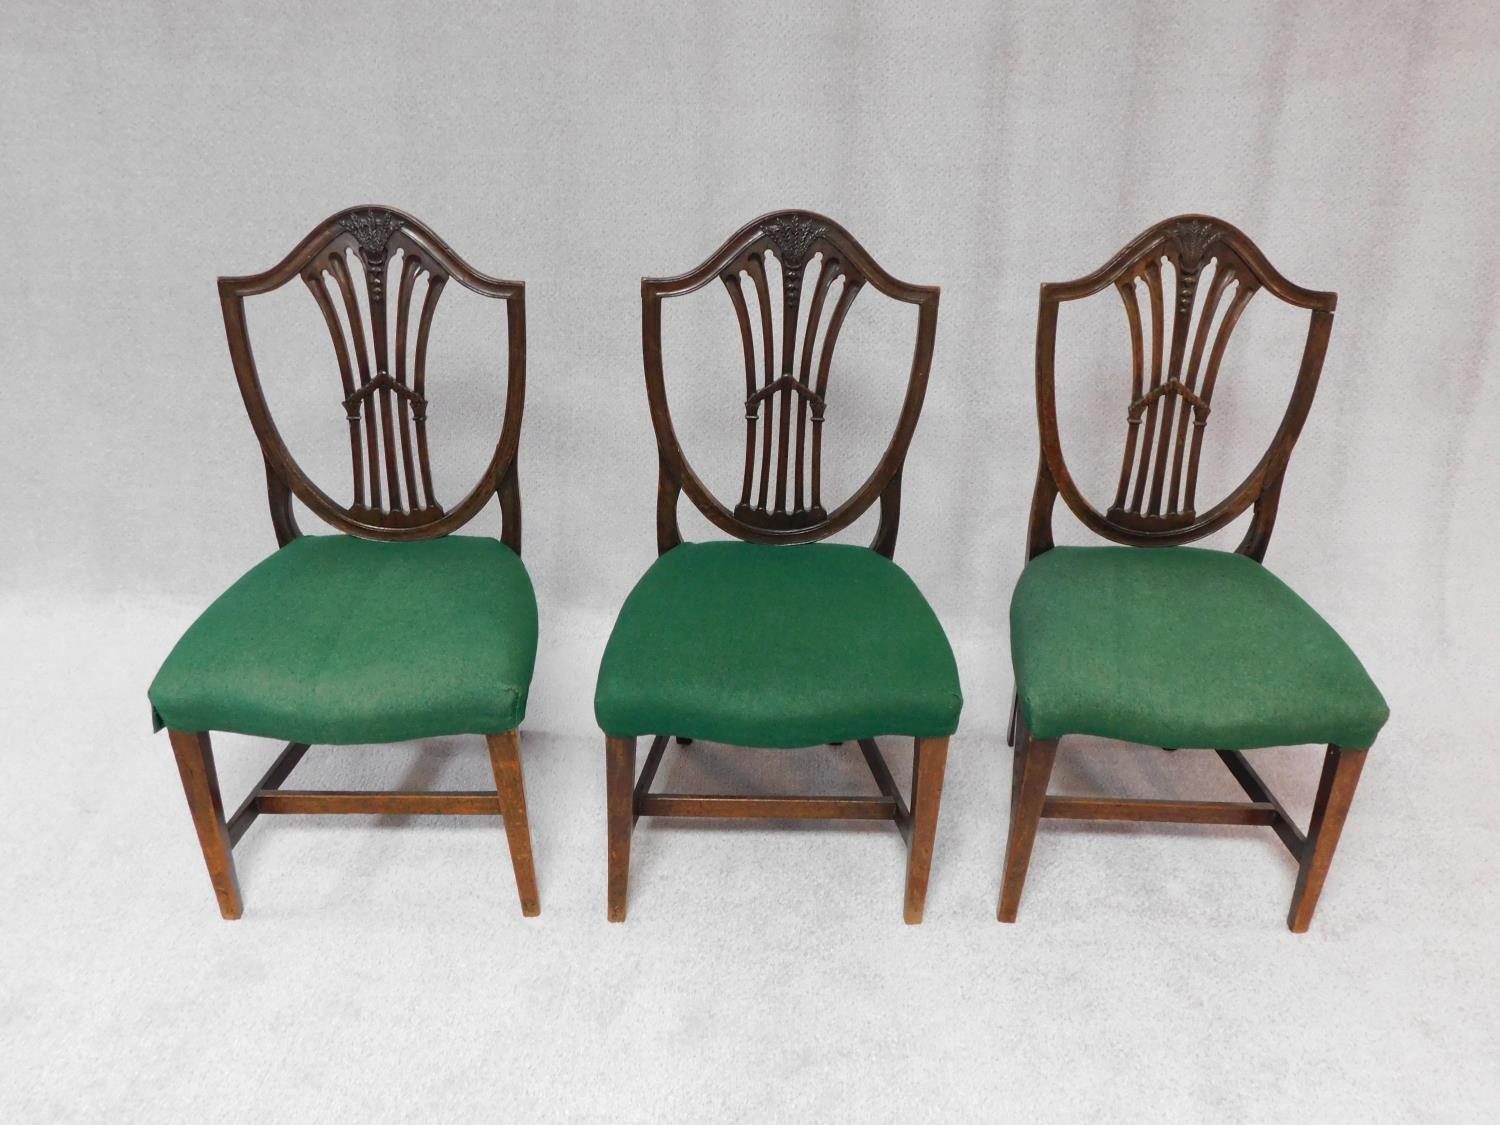 A set of three 19th century mahogany dining chairs with Hepplewhite style shield shaped pierced